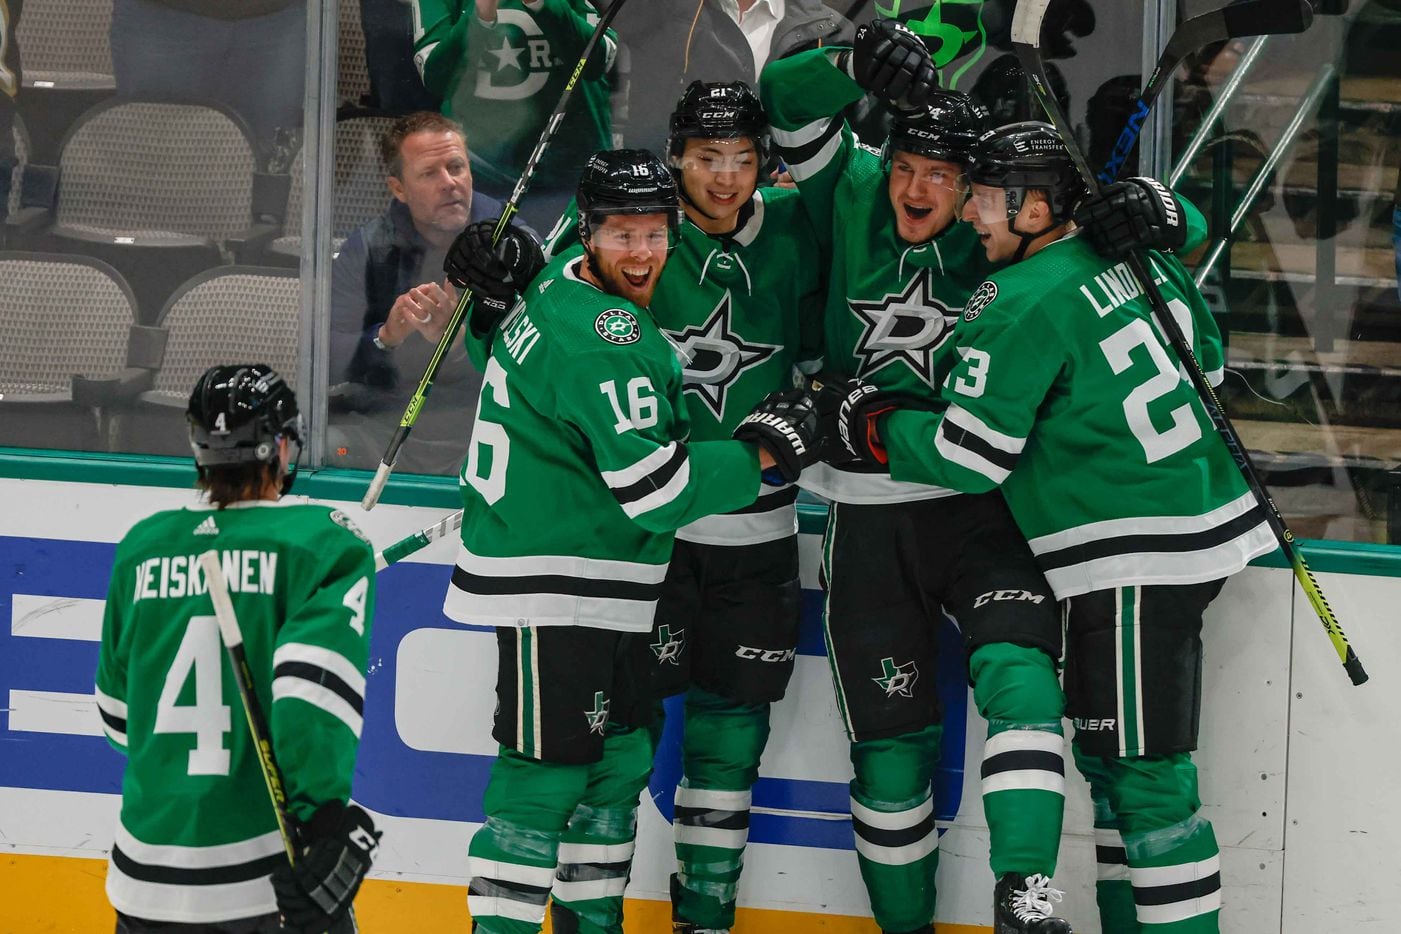 Dallas Stars left wing Roope Hintz (24) celebrates his goal against the Arizona Coyotes with his teammates left wing Jason Robertson (21), center Joe Pavelski (16), defenseman Esa Lindell (23) and defenseman Miro Heiskanen (4) during first period at the American Airlines Center in Dallas on Monday, December 6, 2021. (Lola Gomez/The Dallas Morning News)